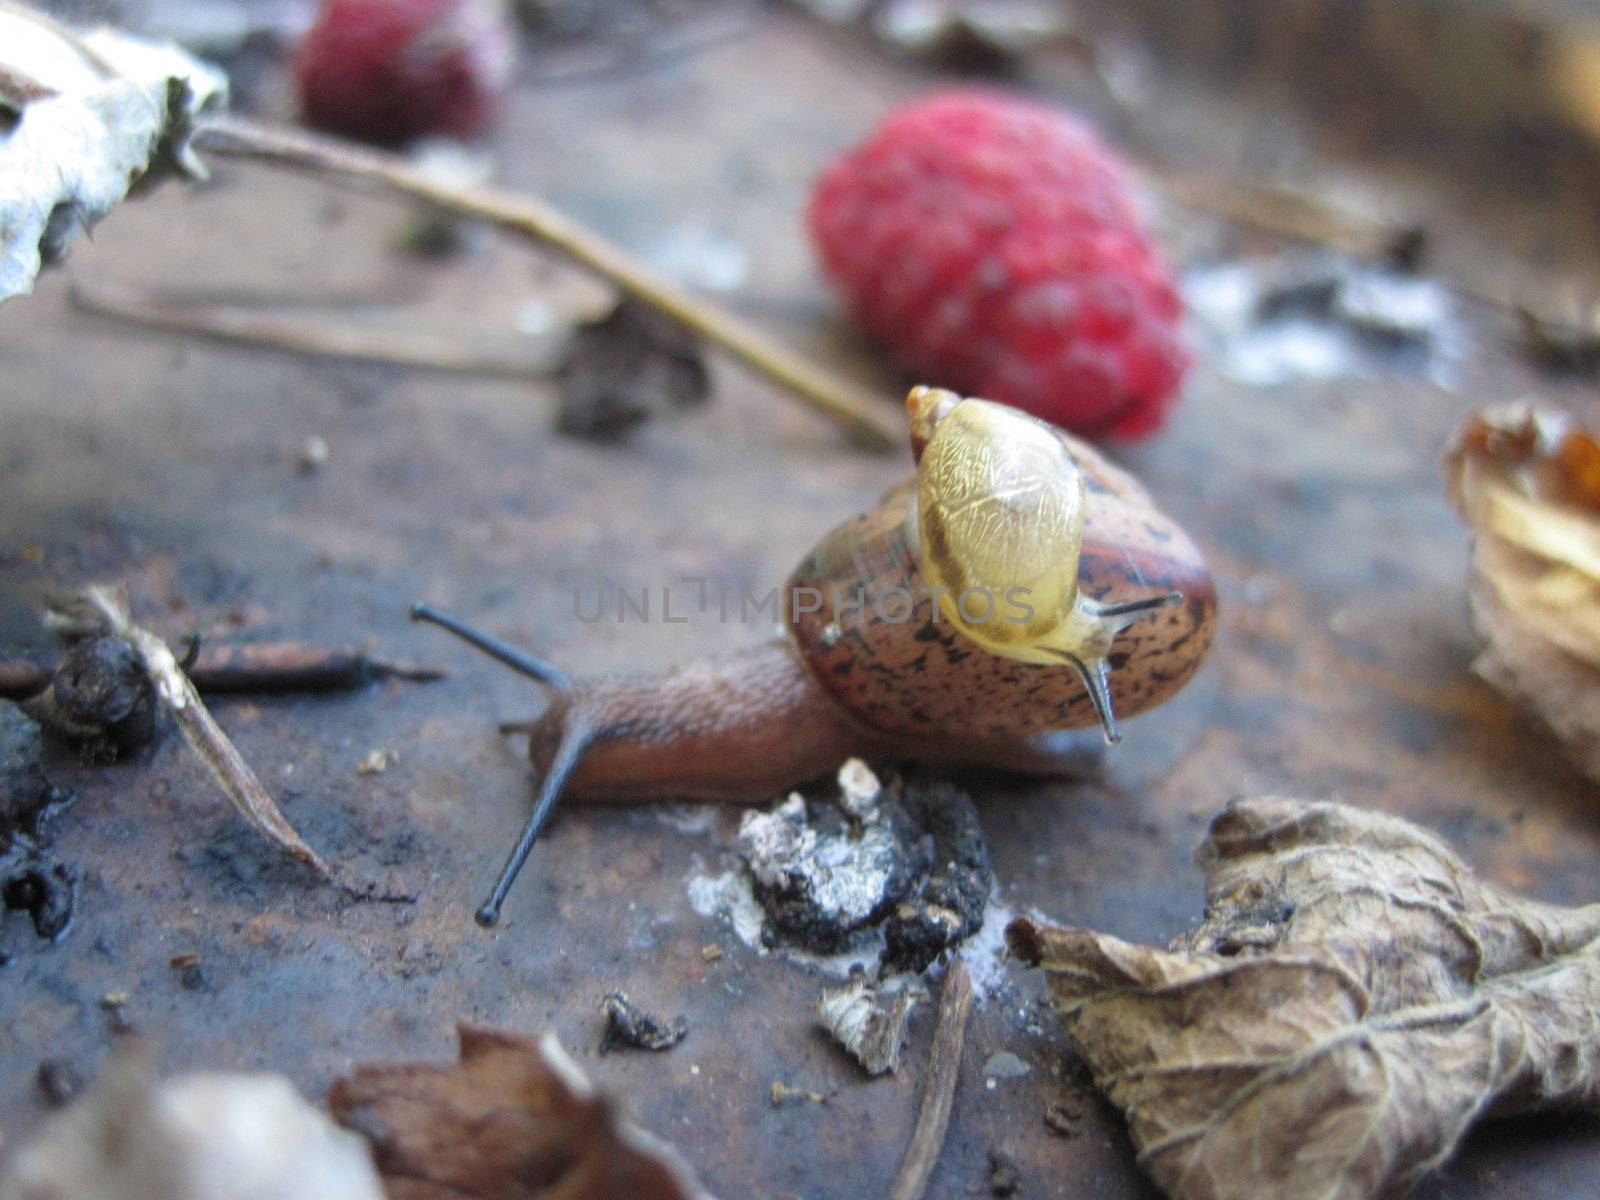 Raspberries with snail mother and child